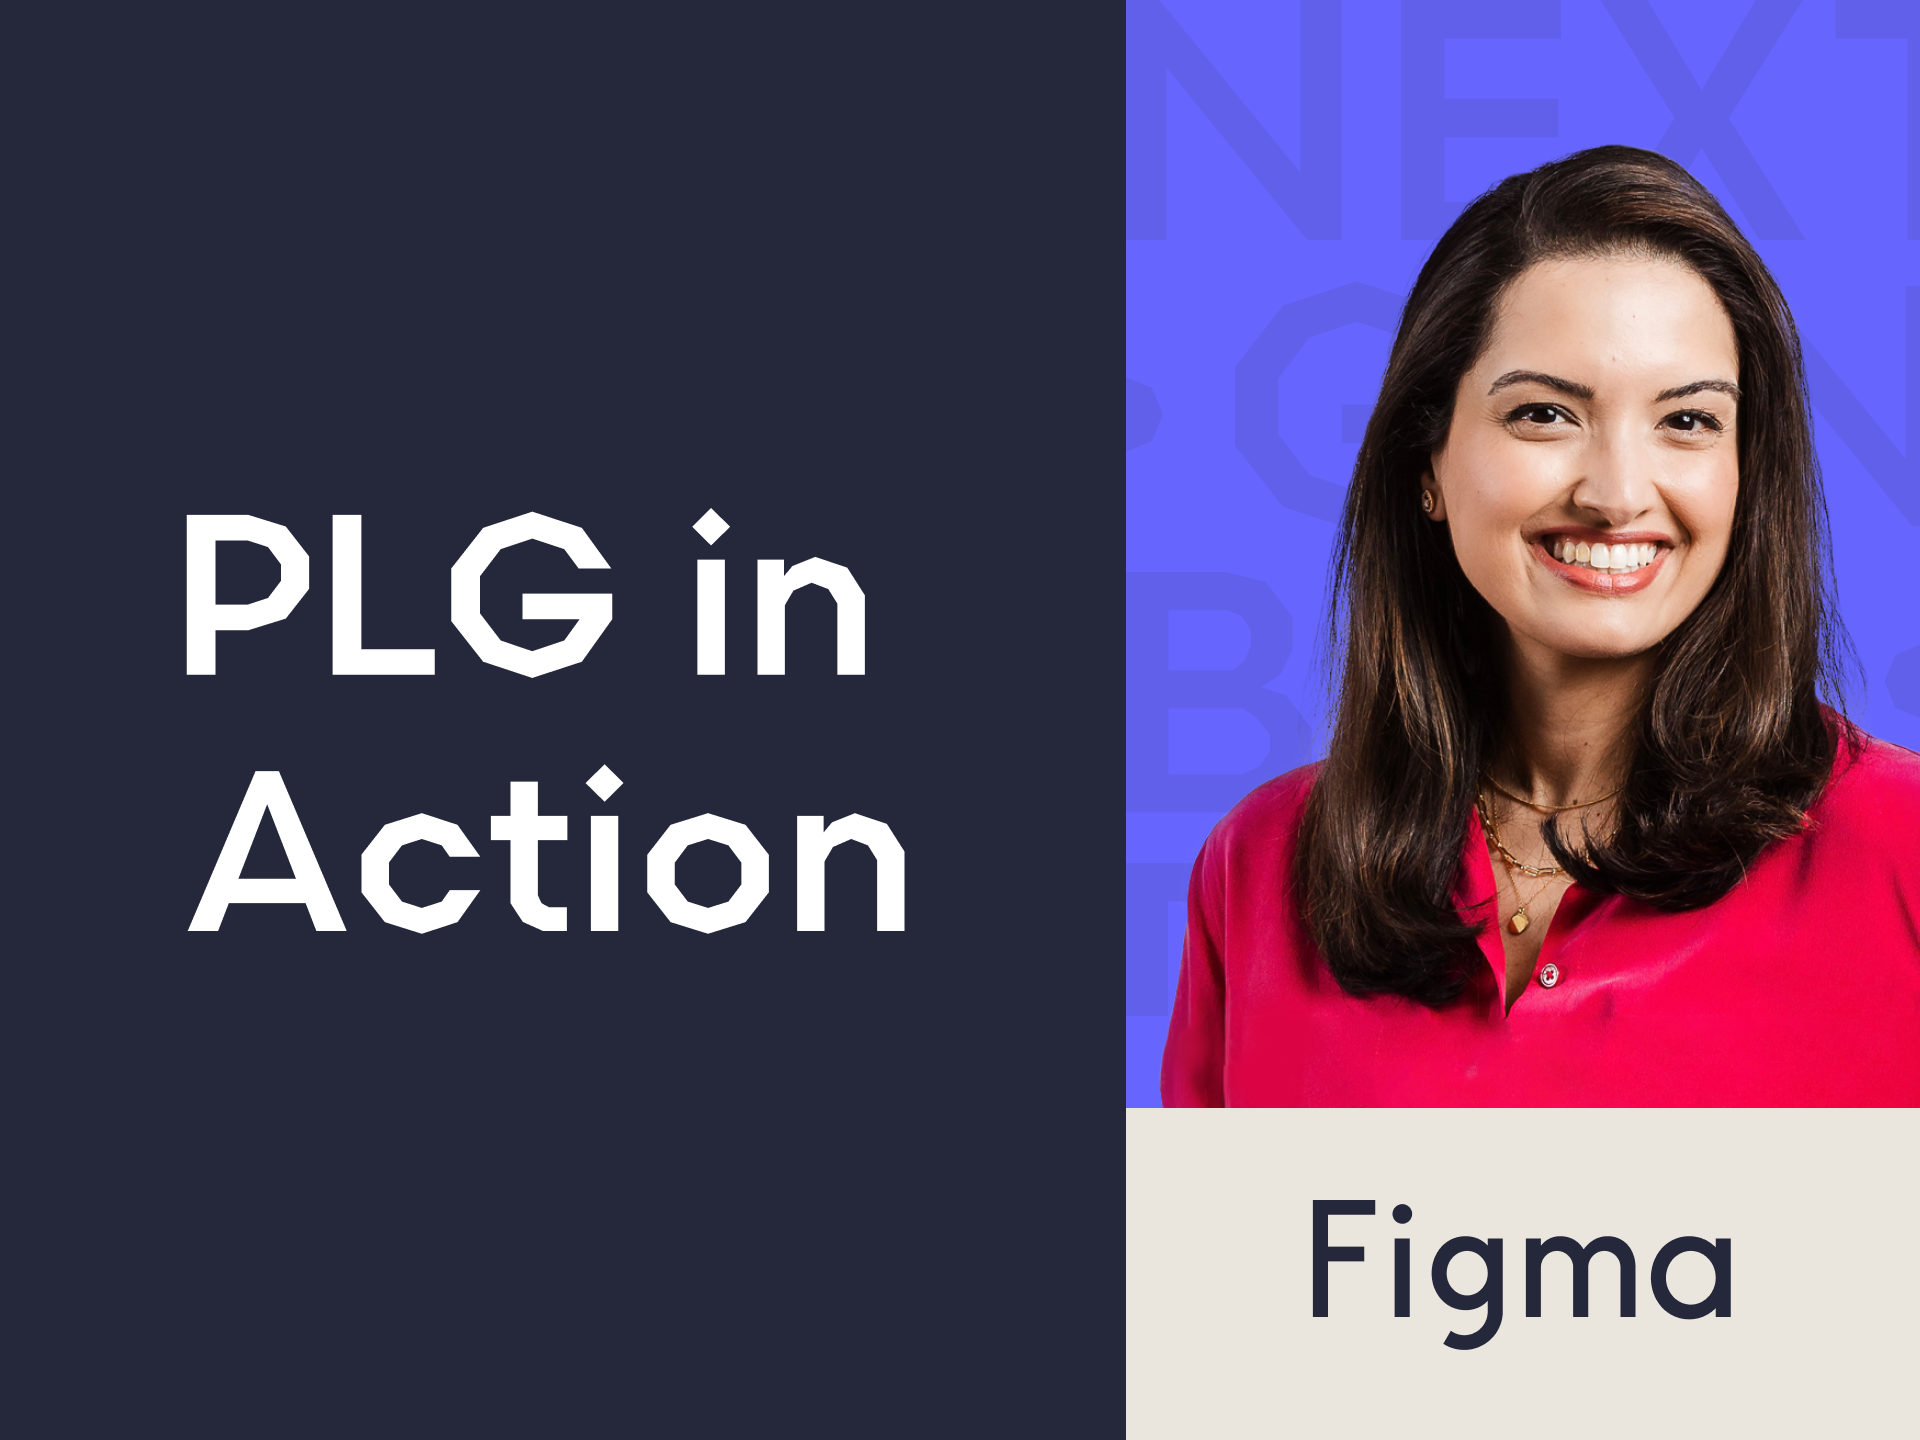 Sheila Vashee CMO of Figma headshot, title, and Next Gen Builders Podcast title "PLG in Action" on a navy background